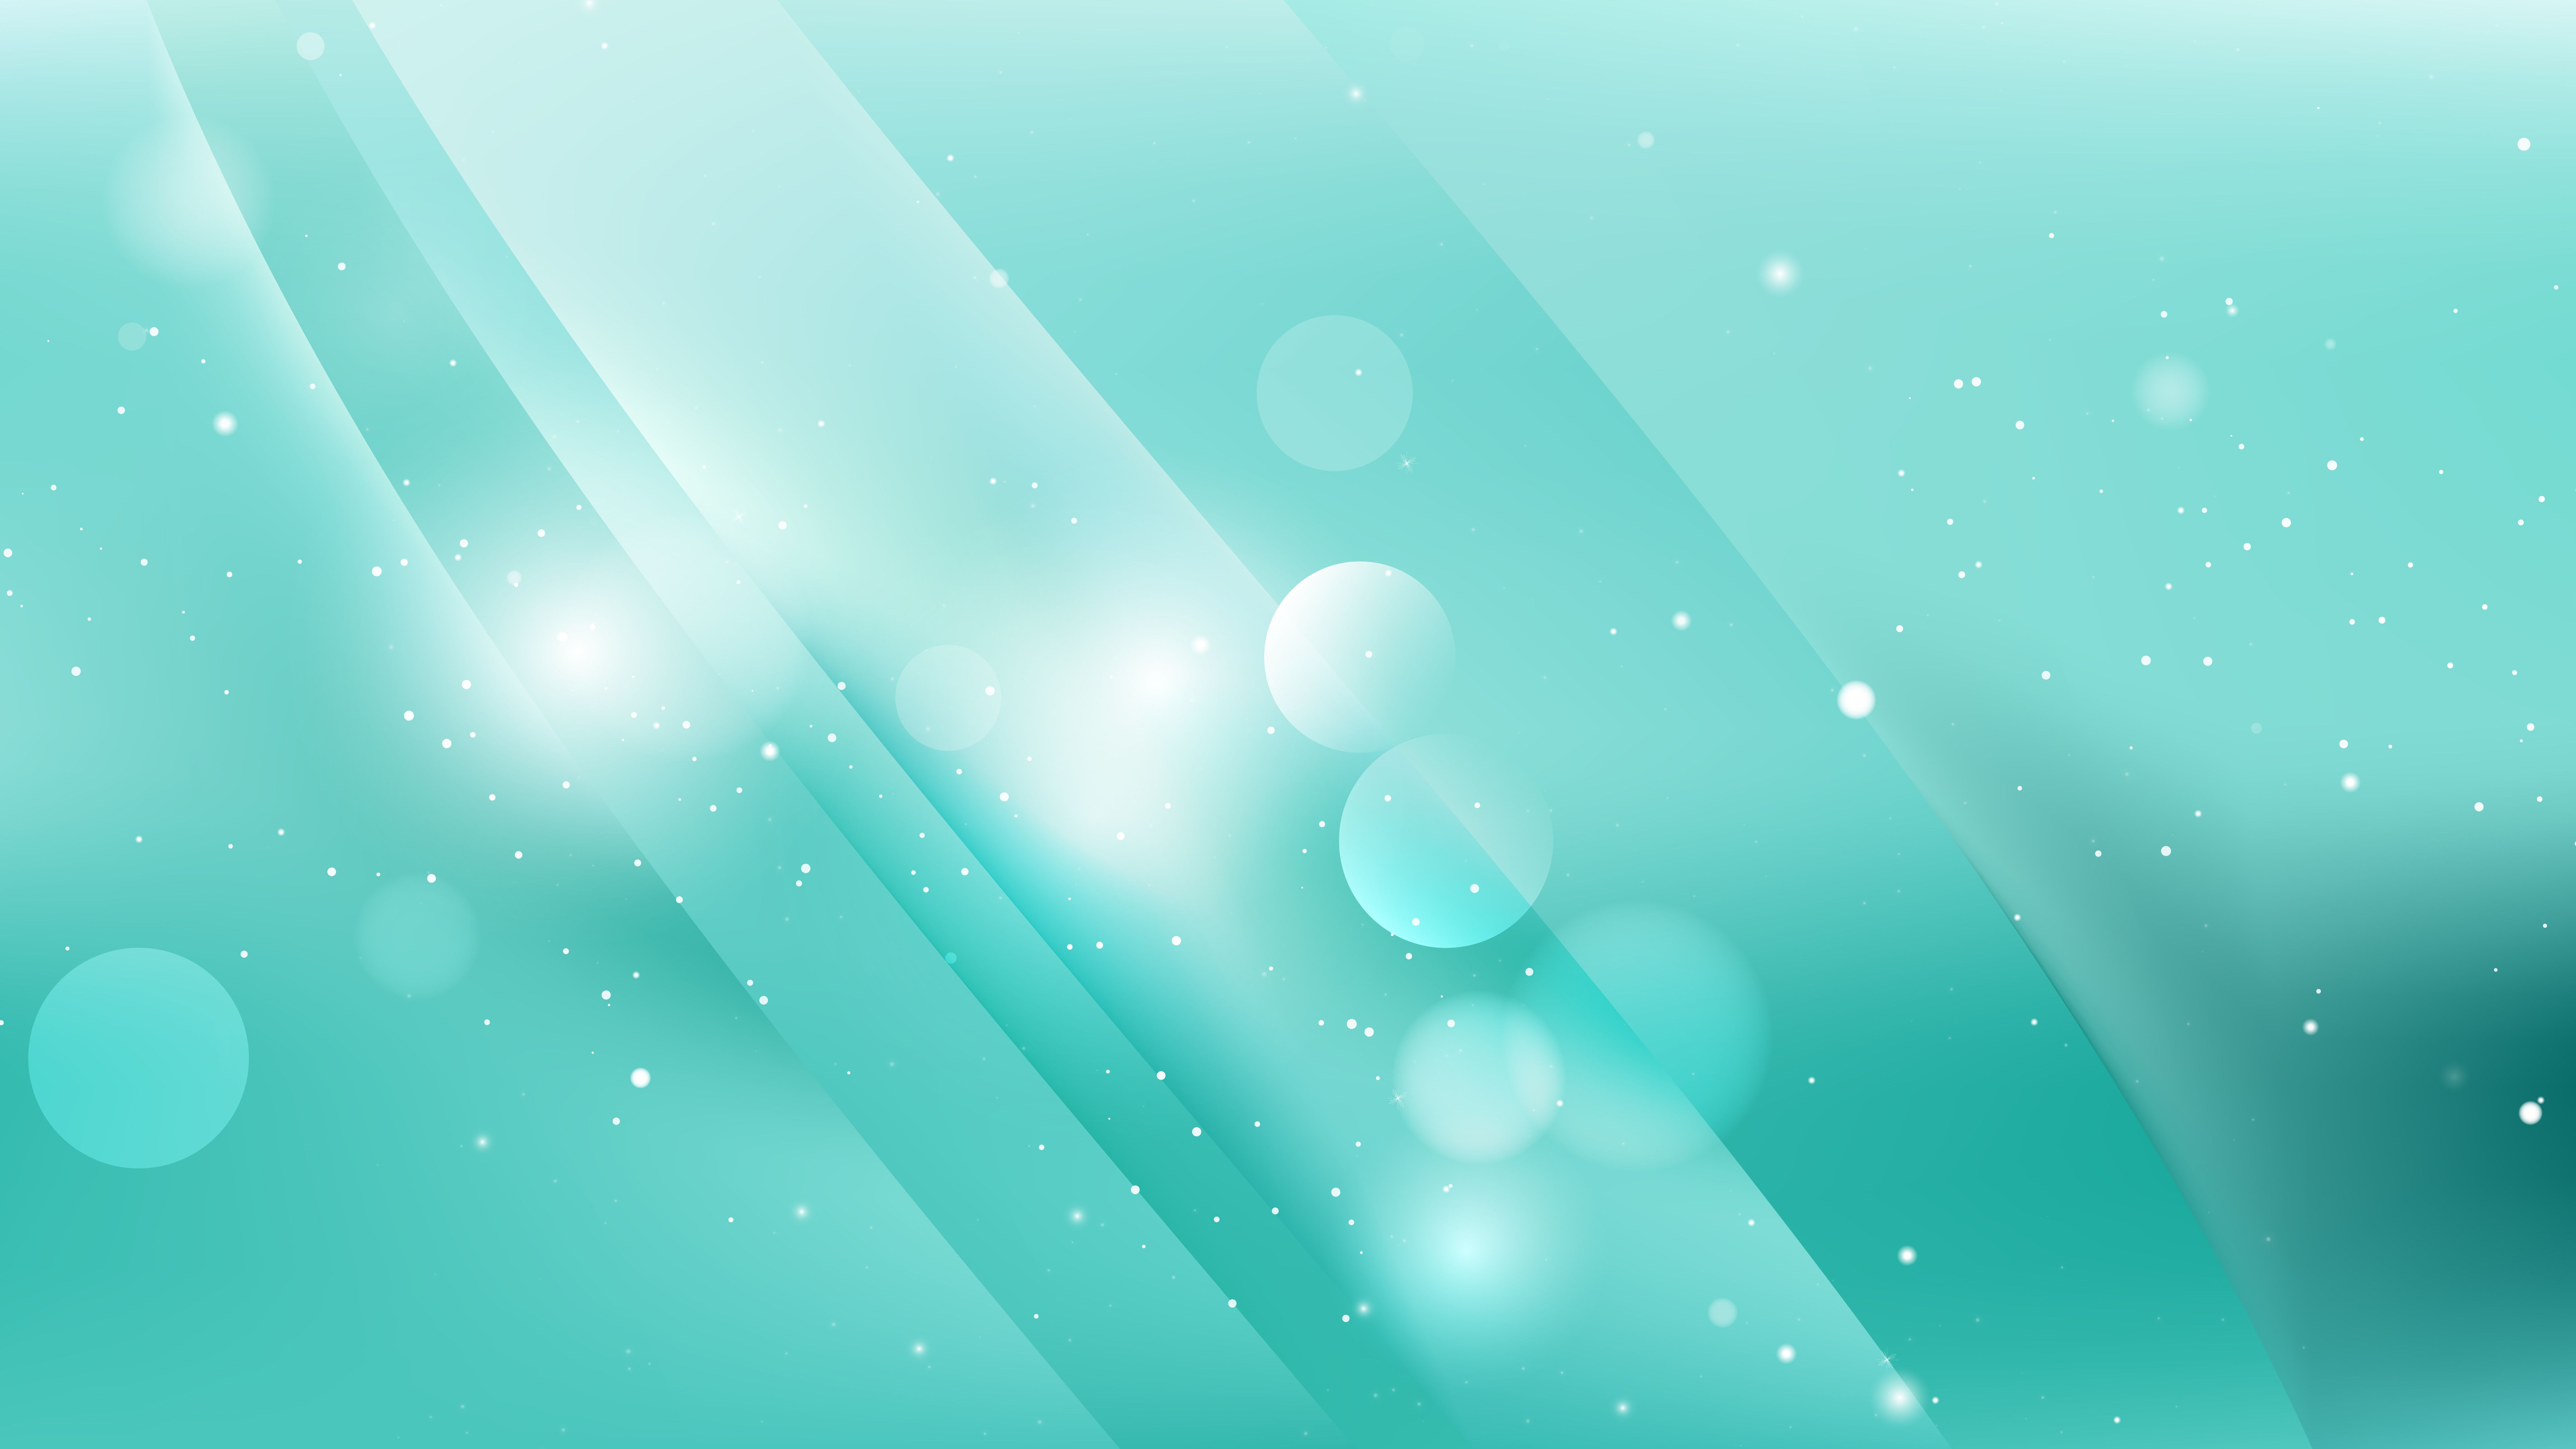 Mint Abstract Wallpaper 4k HD Background On